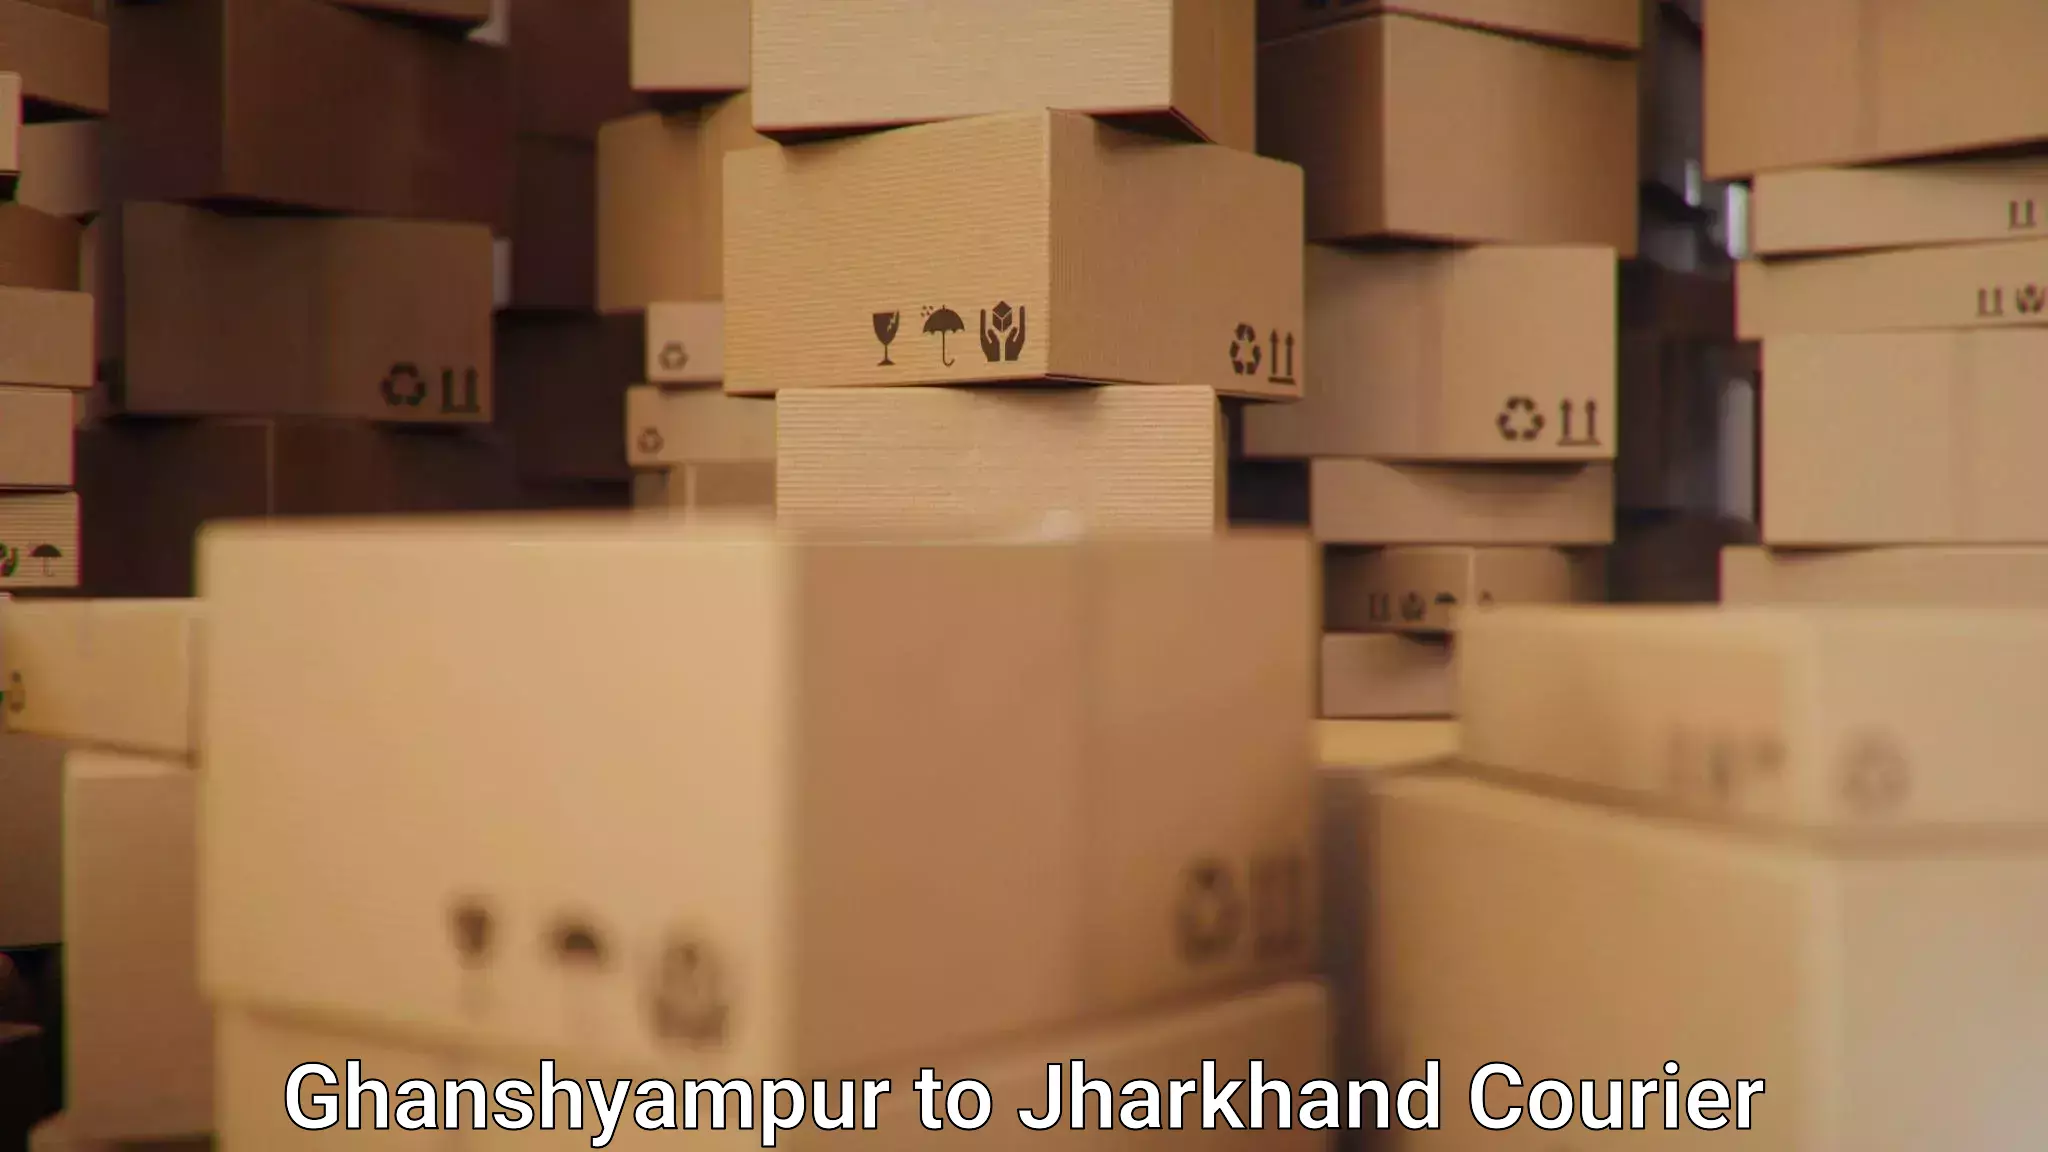 Advanced tracking systems Ghanshyampur to Jharkhand